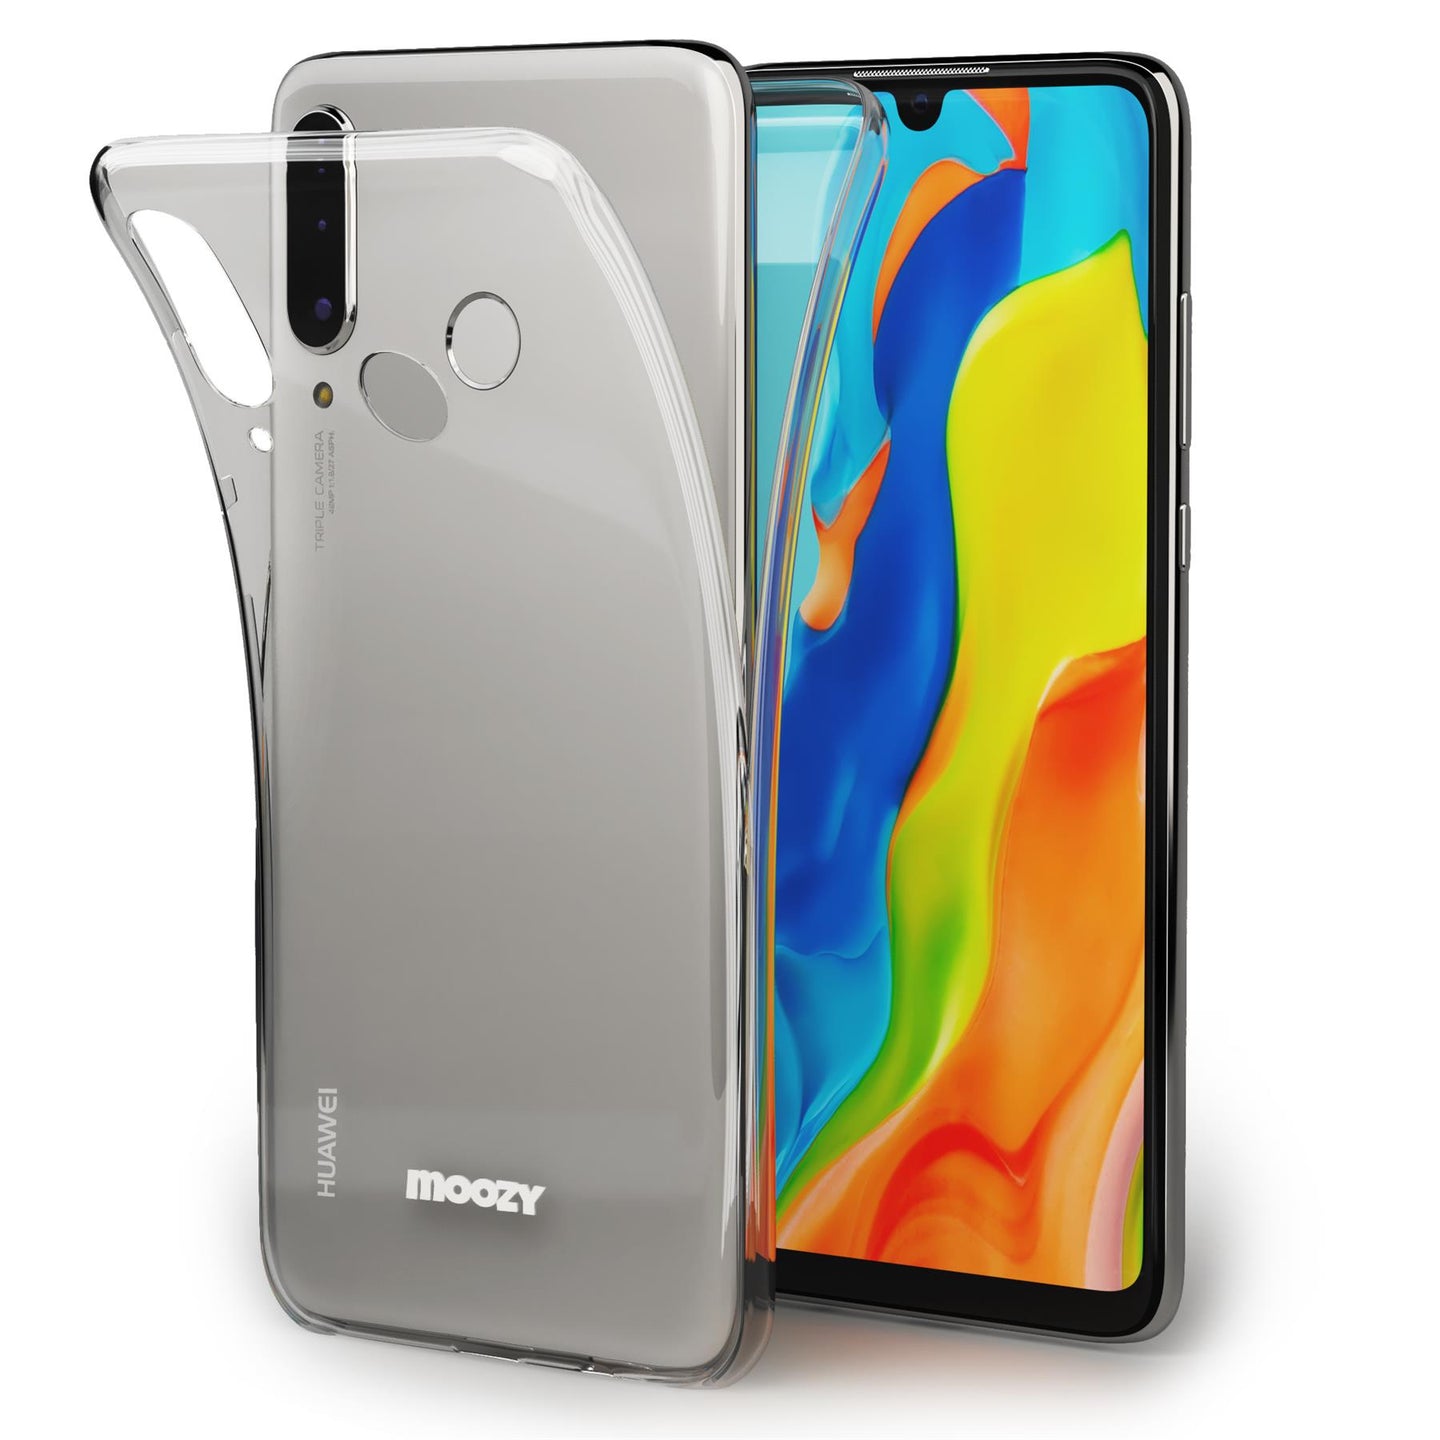 Moozy 360 Degree Case for Huawei P30 Lite - Full body Front and Back Slim Clear Transparent TPU Silicone Gel Cover